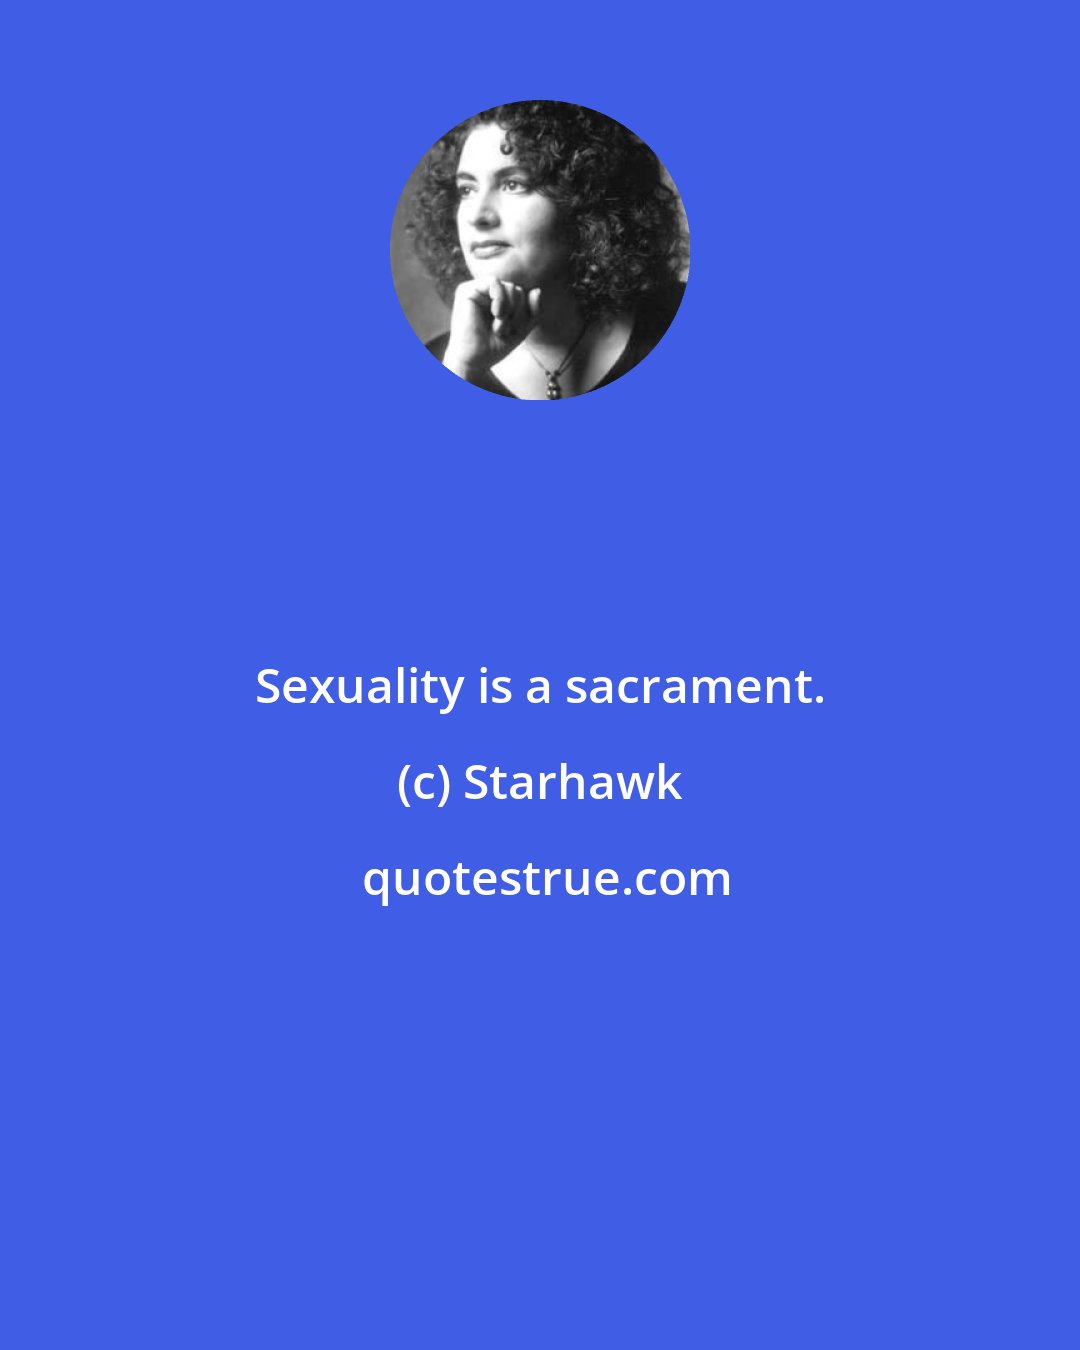 Starhawk: Sexuality is a sacrament.